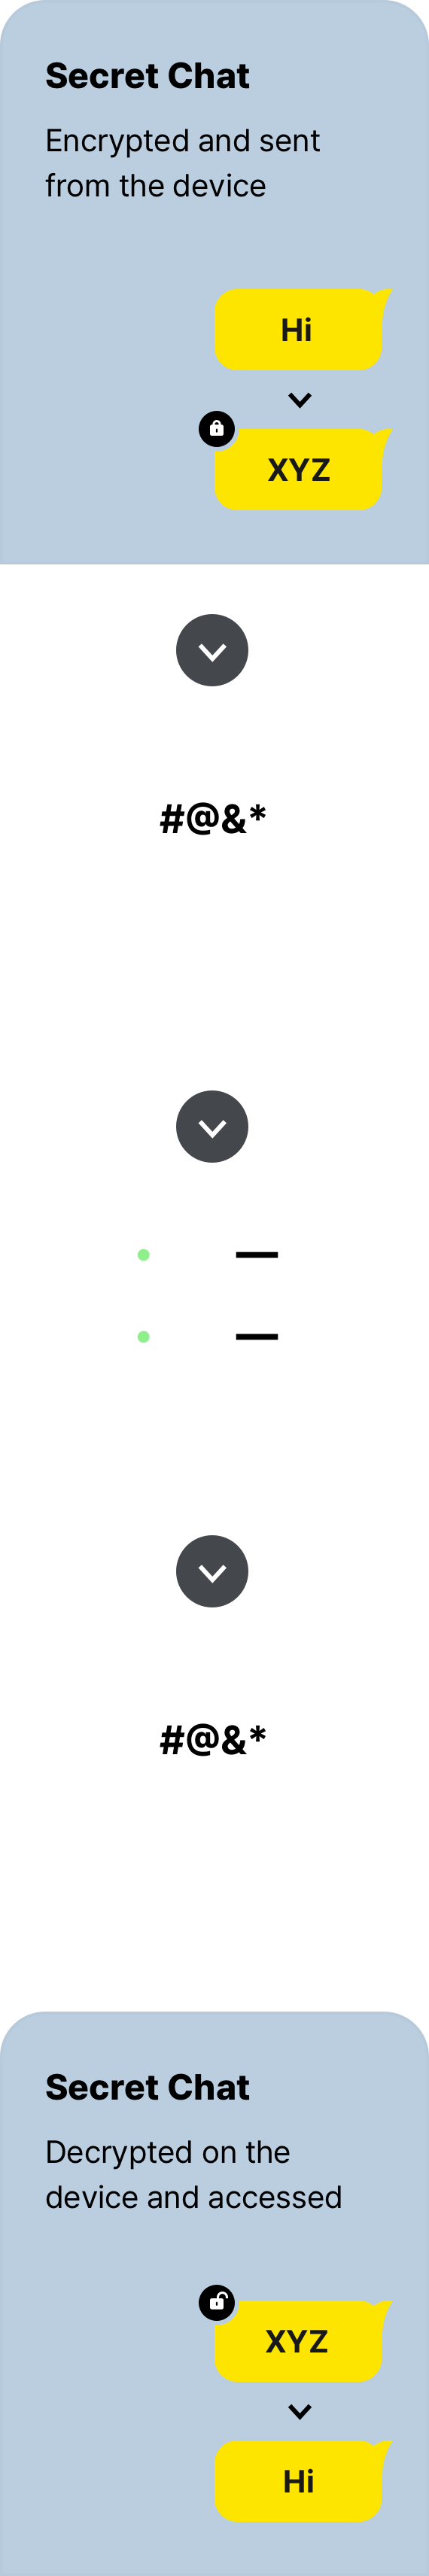 The 'Hello' message sent to KakaoTalk is encrypted in the device. Then, it is encrypted and sent to the server. The server encrypts the message again, sends it to the recipient's device, decrypts it in the device and delivers the 'Hello' message.